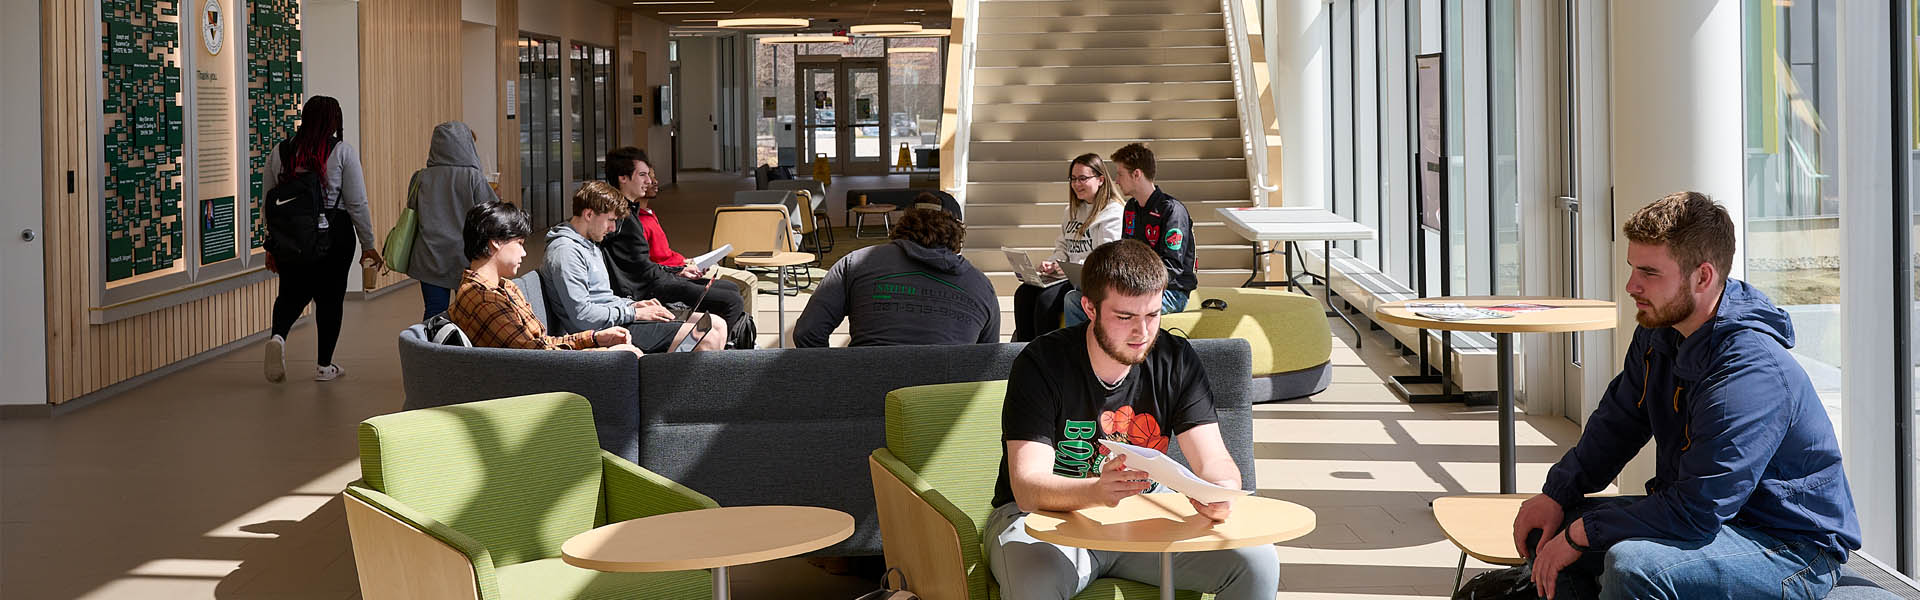 Students study in the new Harold Alfond Hall